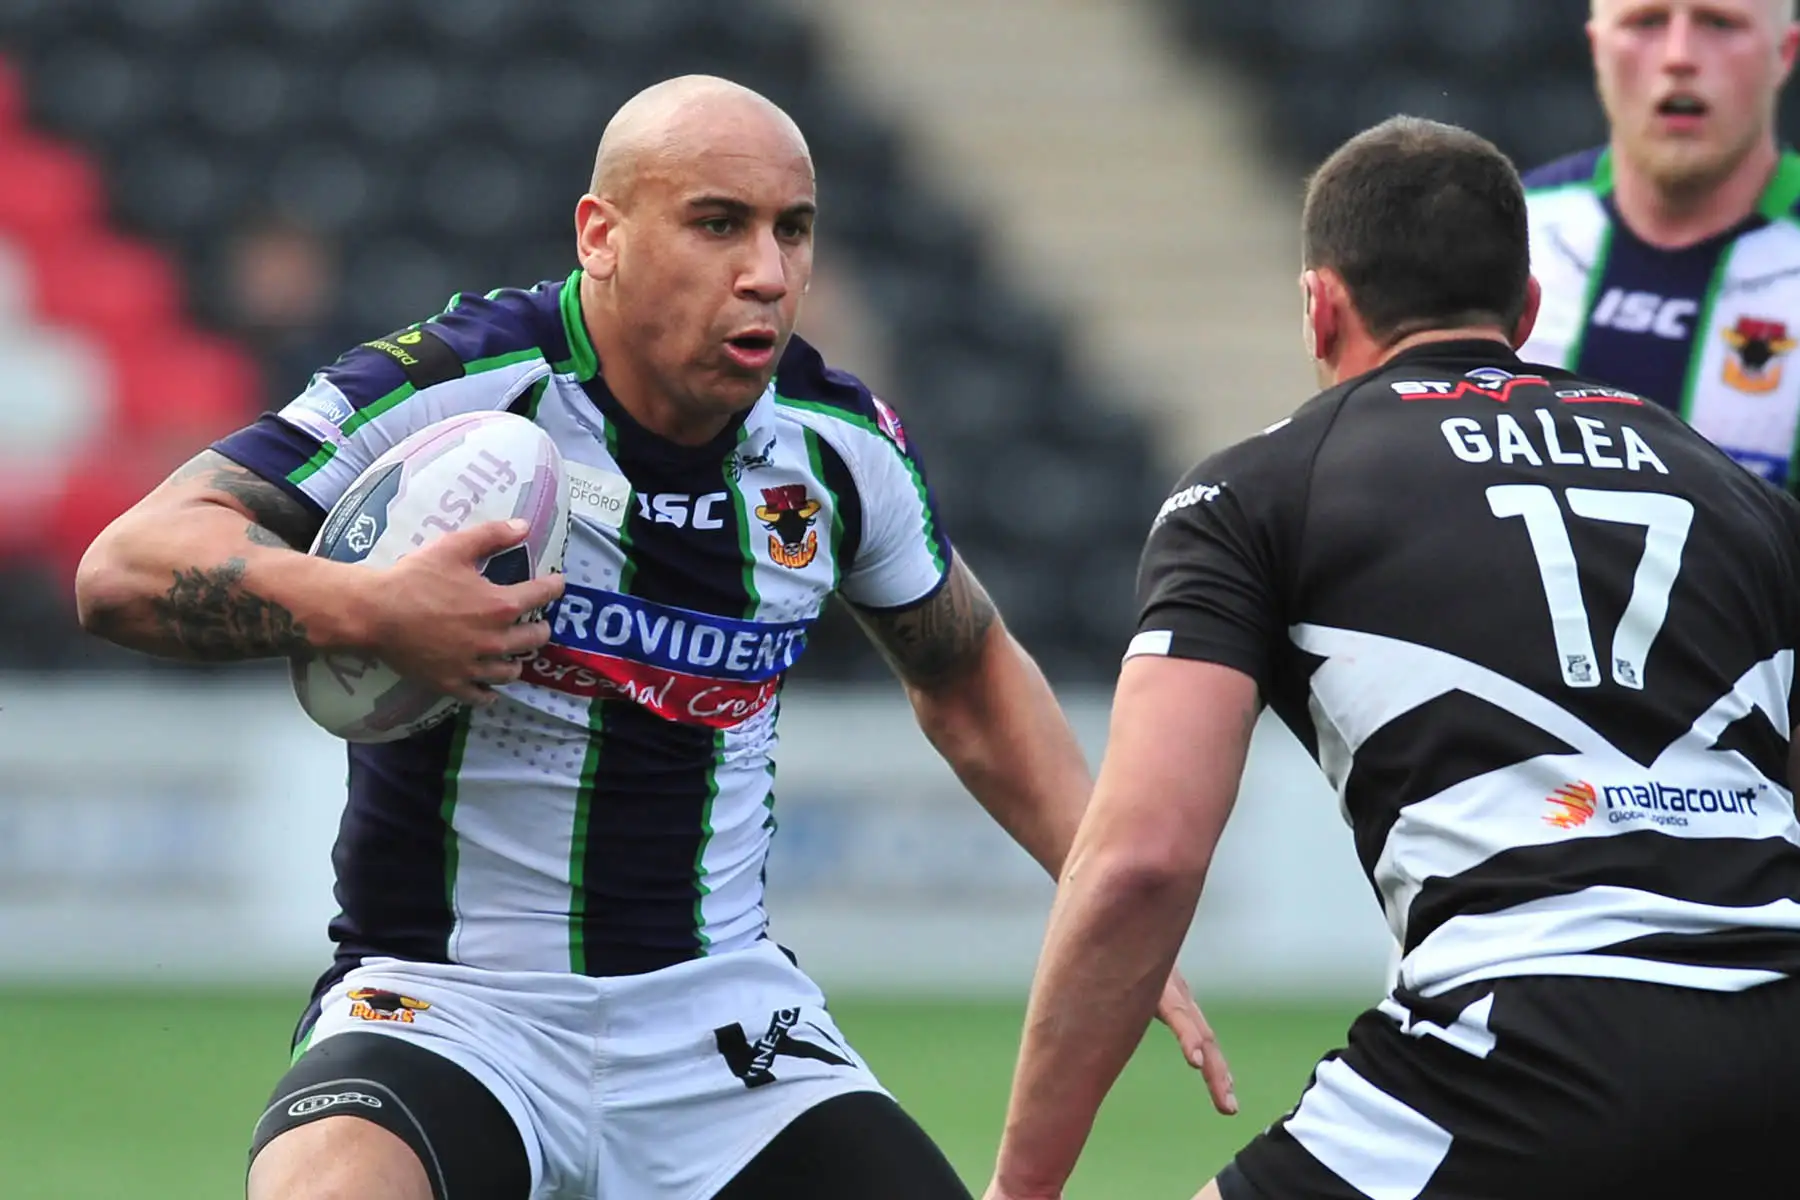 Rugby League Today: Blythe helps NHS, Wigan injury update & impact of furloughing players